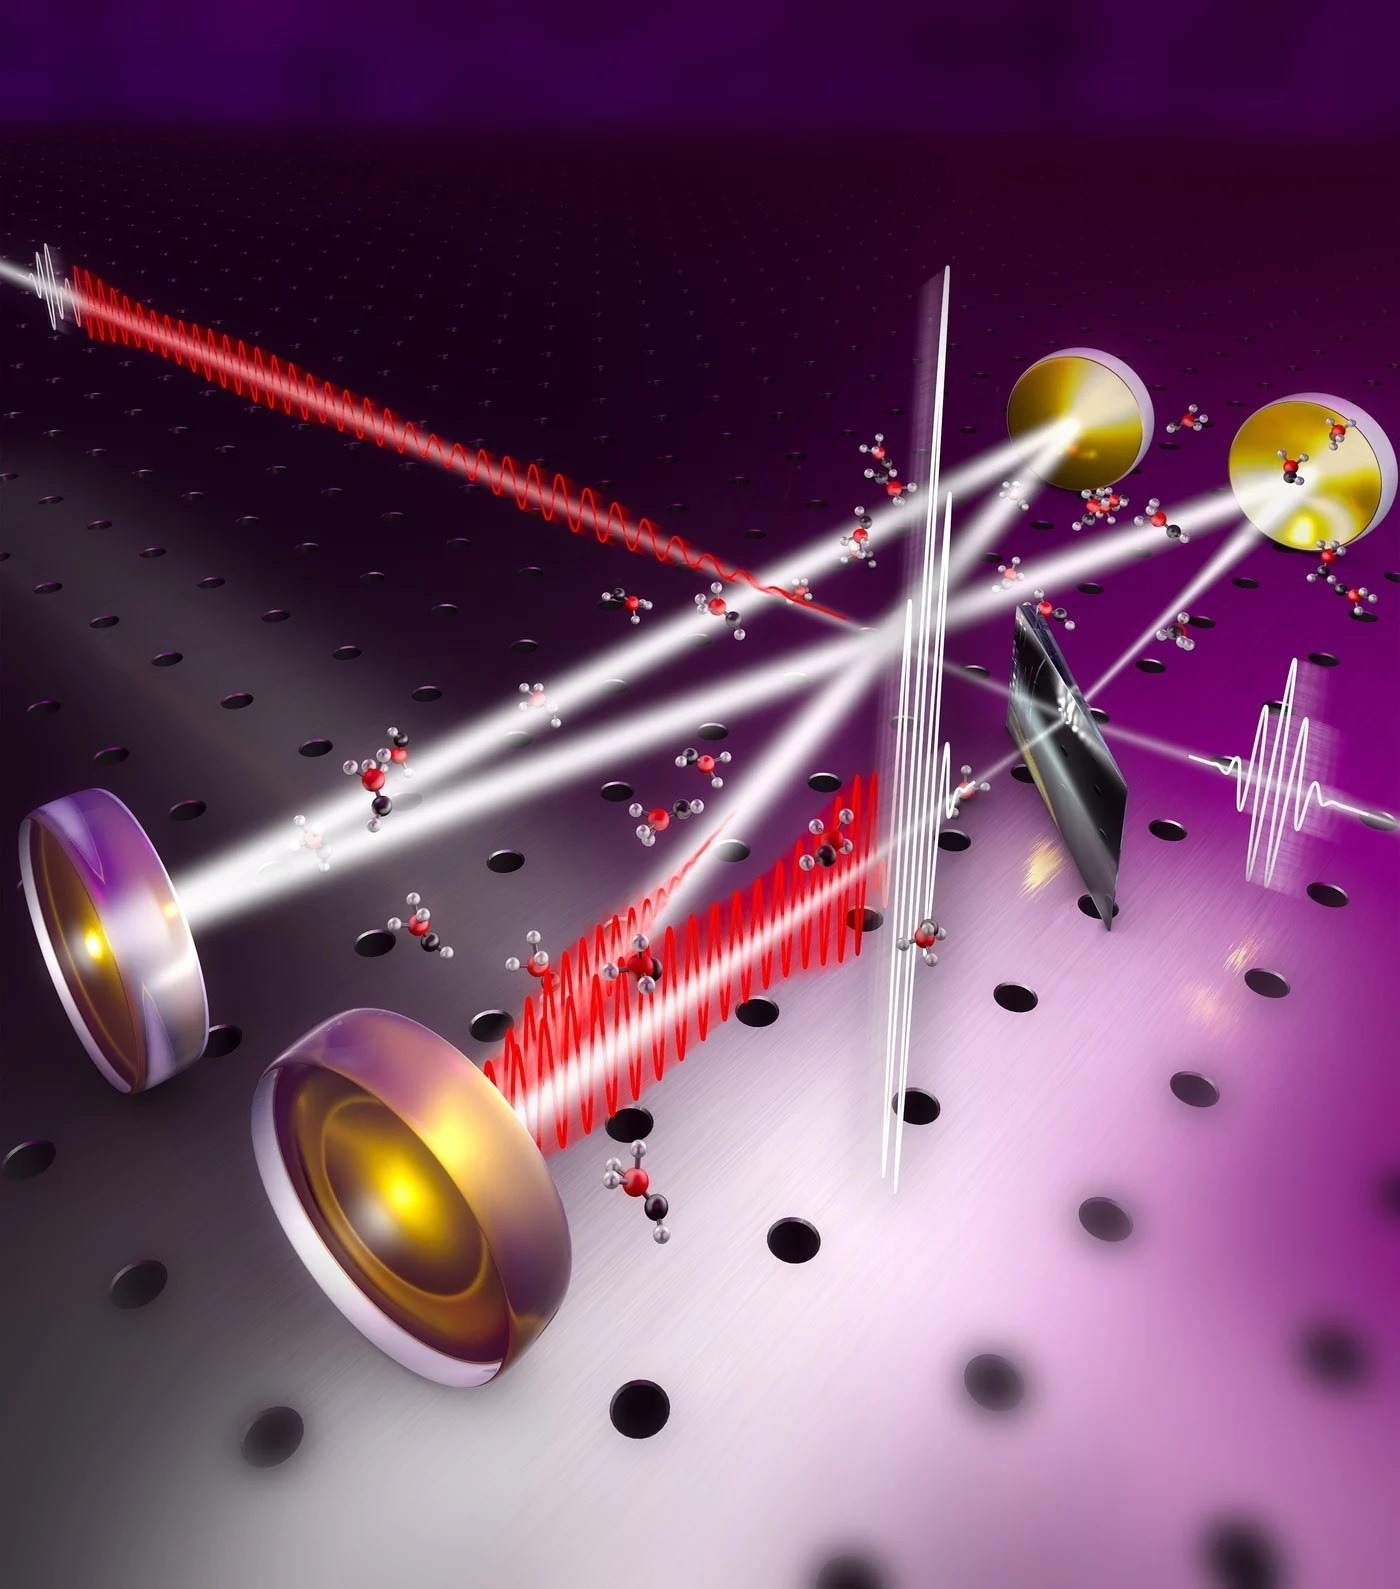 Researchers are creating novel methods to detect trace particles in the environment, such as volatile organic chemicals. These methods include advances in optical spectroscopy.